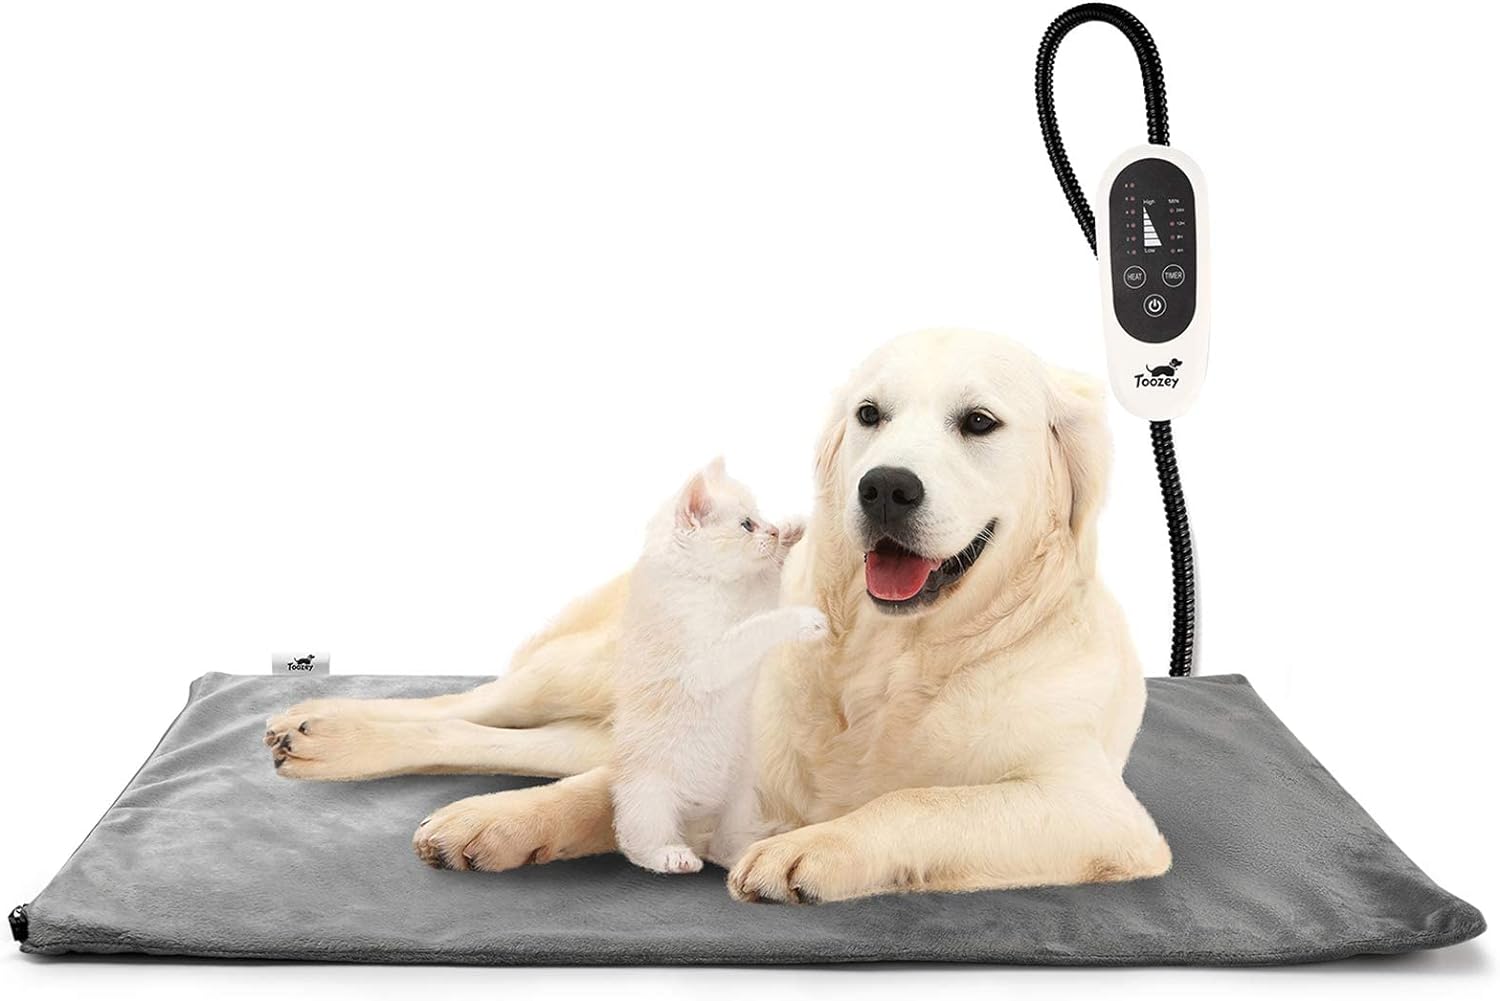 Extra % Off! Your Exclusive Discount Awaits: Toozey Dog Heat Pad Electric 70*40 cm